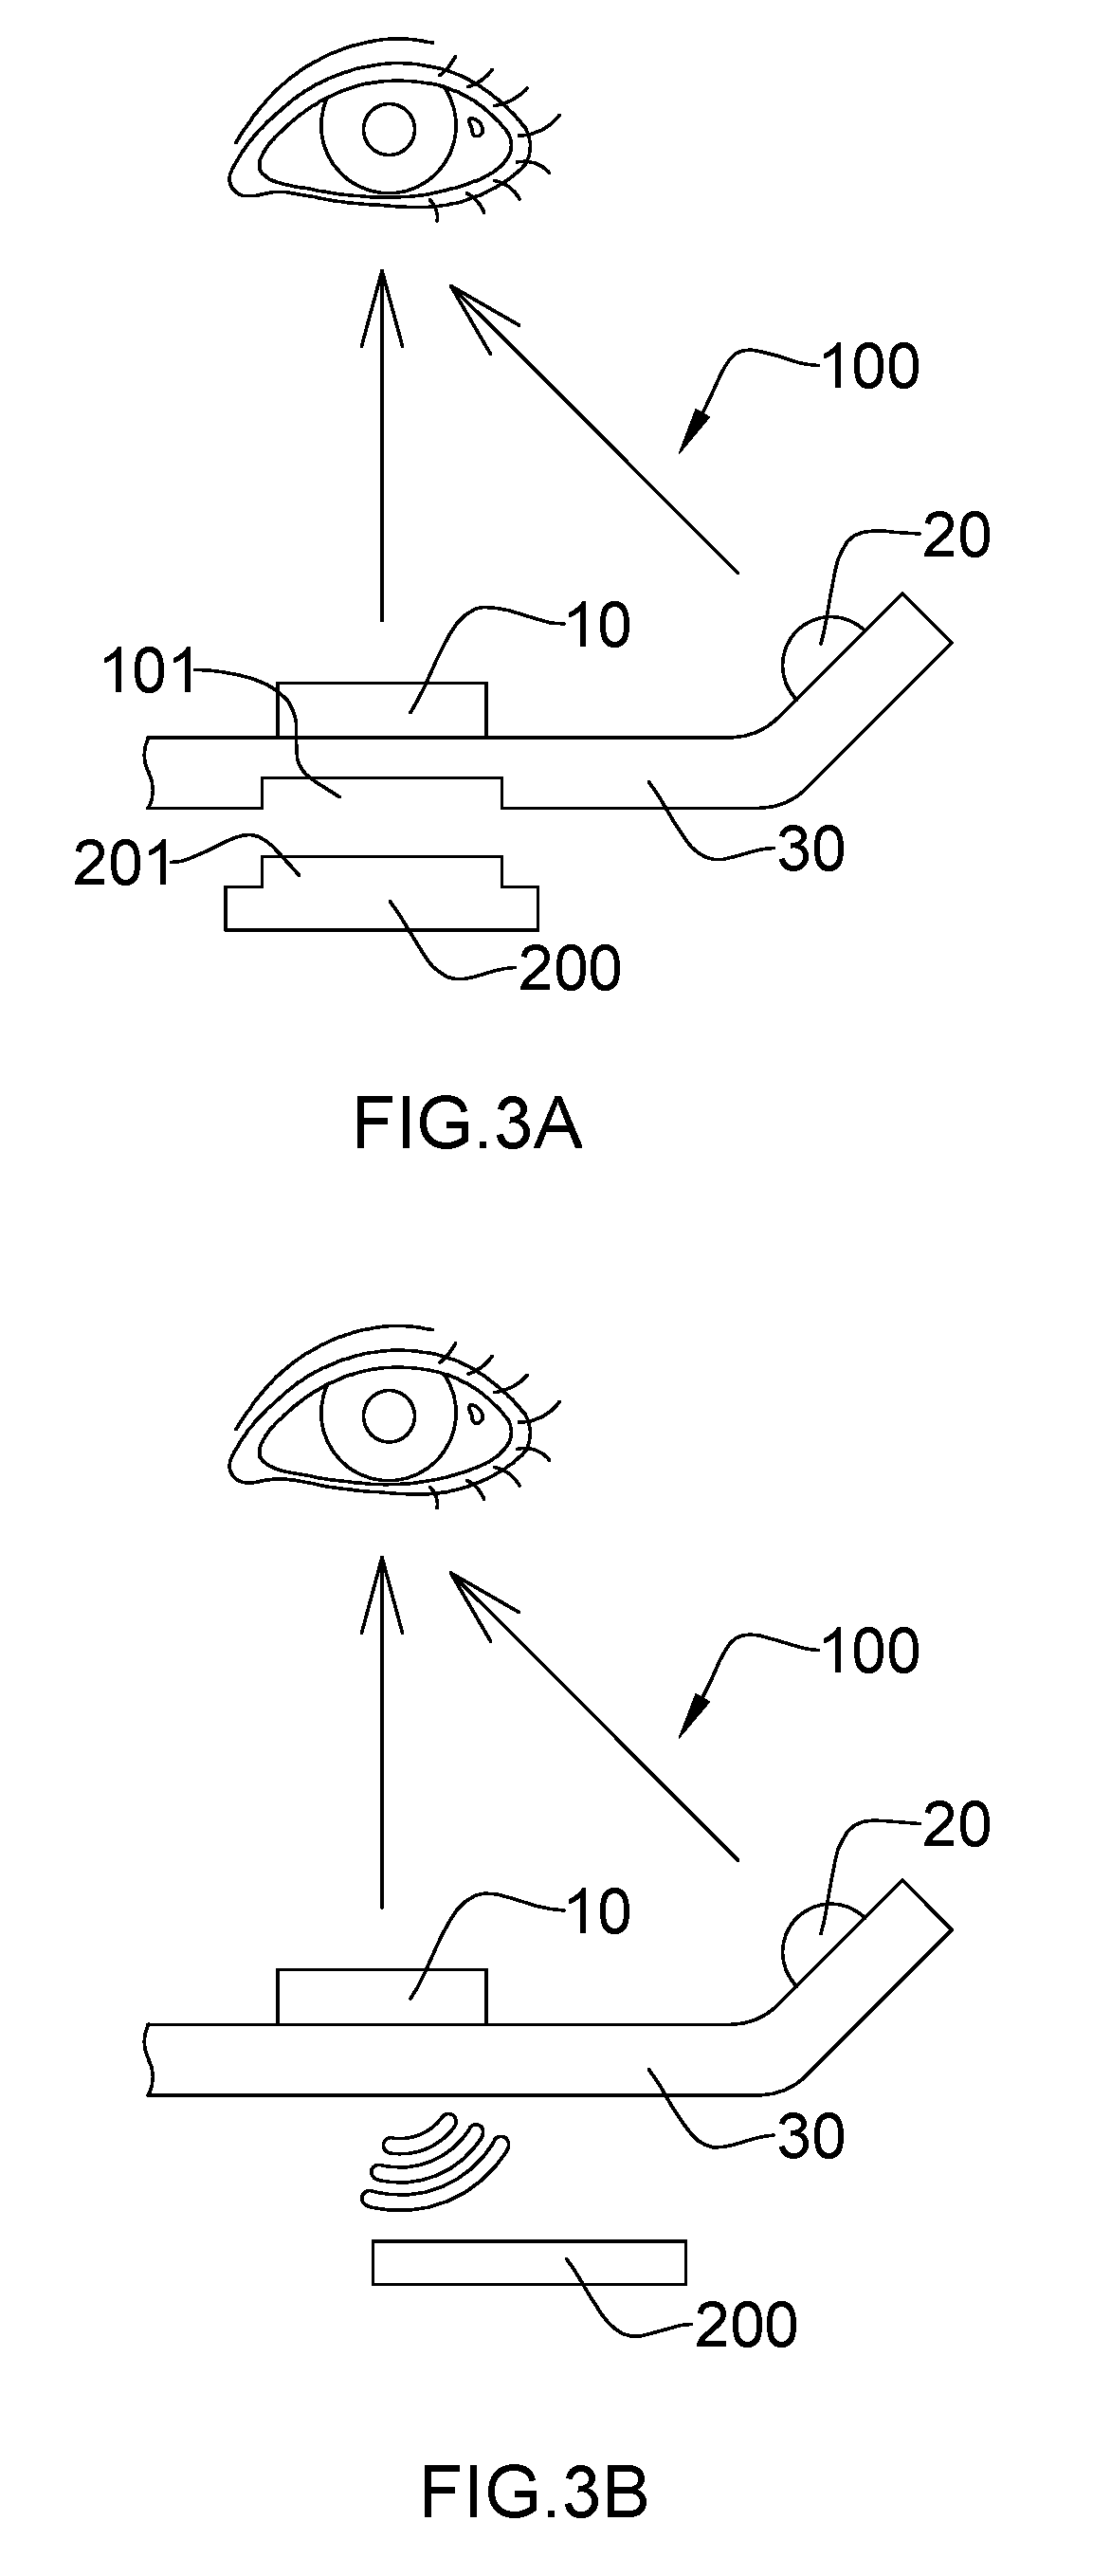 Iris Recognition Device, Manufacturing Method Therefor and Application Thereof